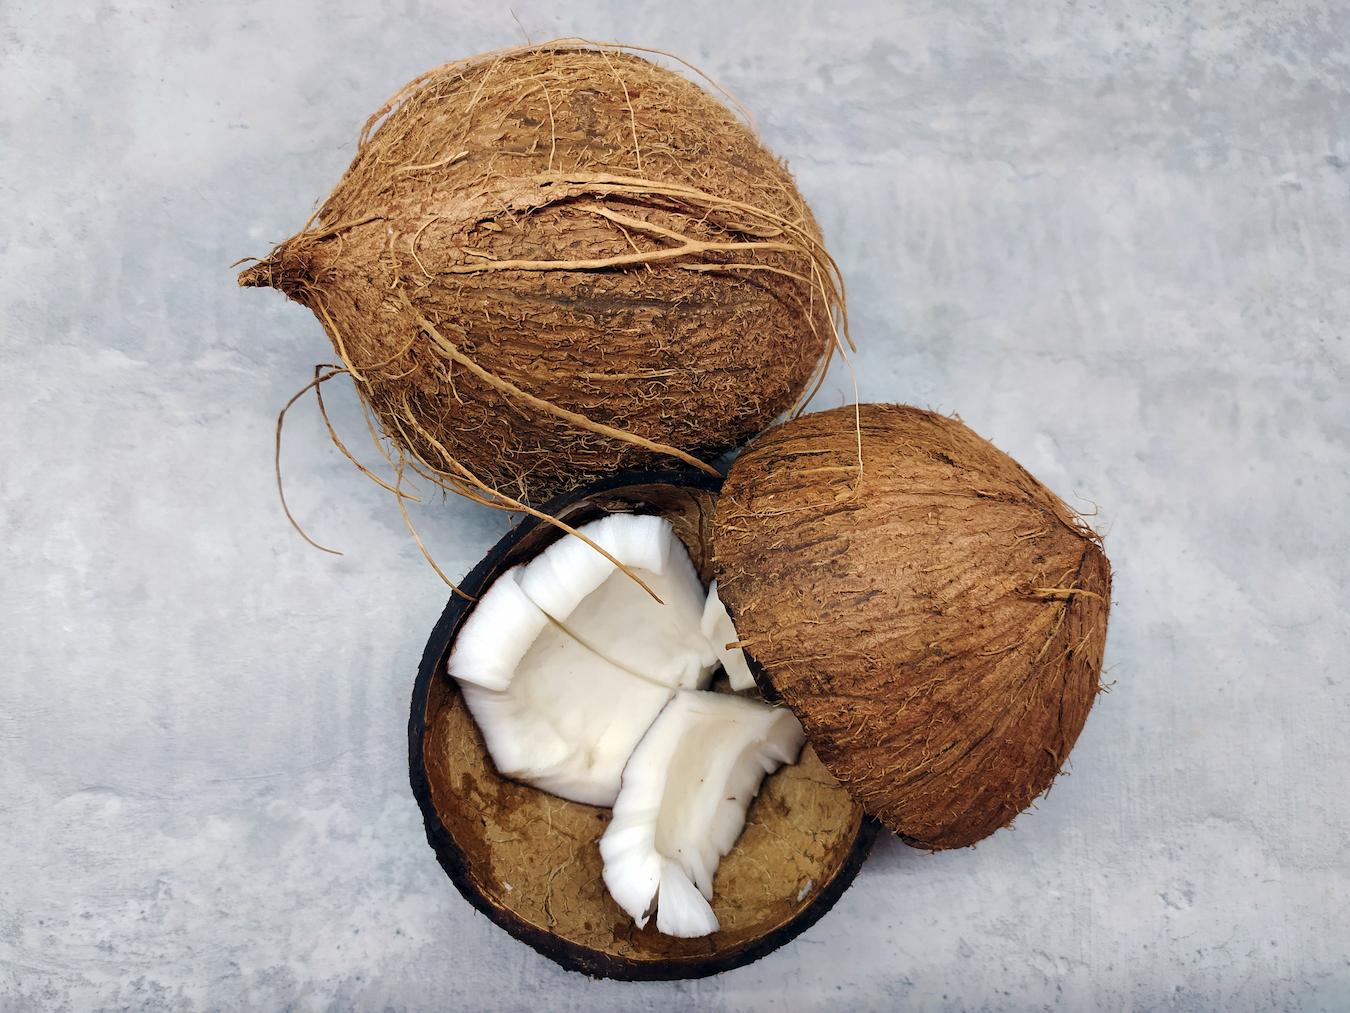 two whole coconuts cosmetic treatment light chemical peel appearance